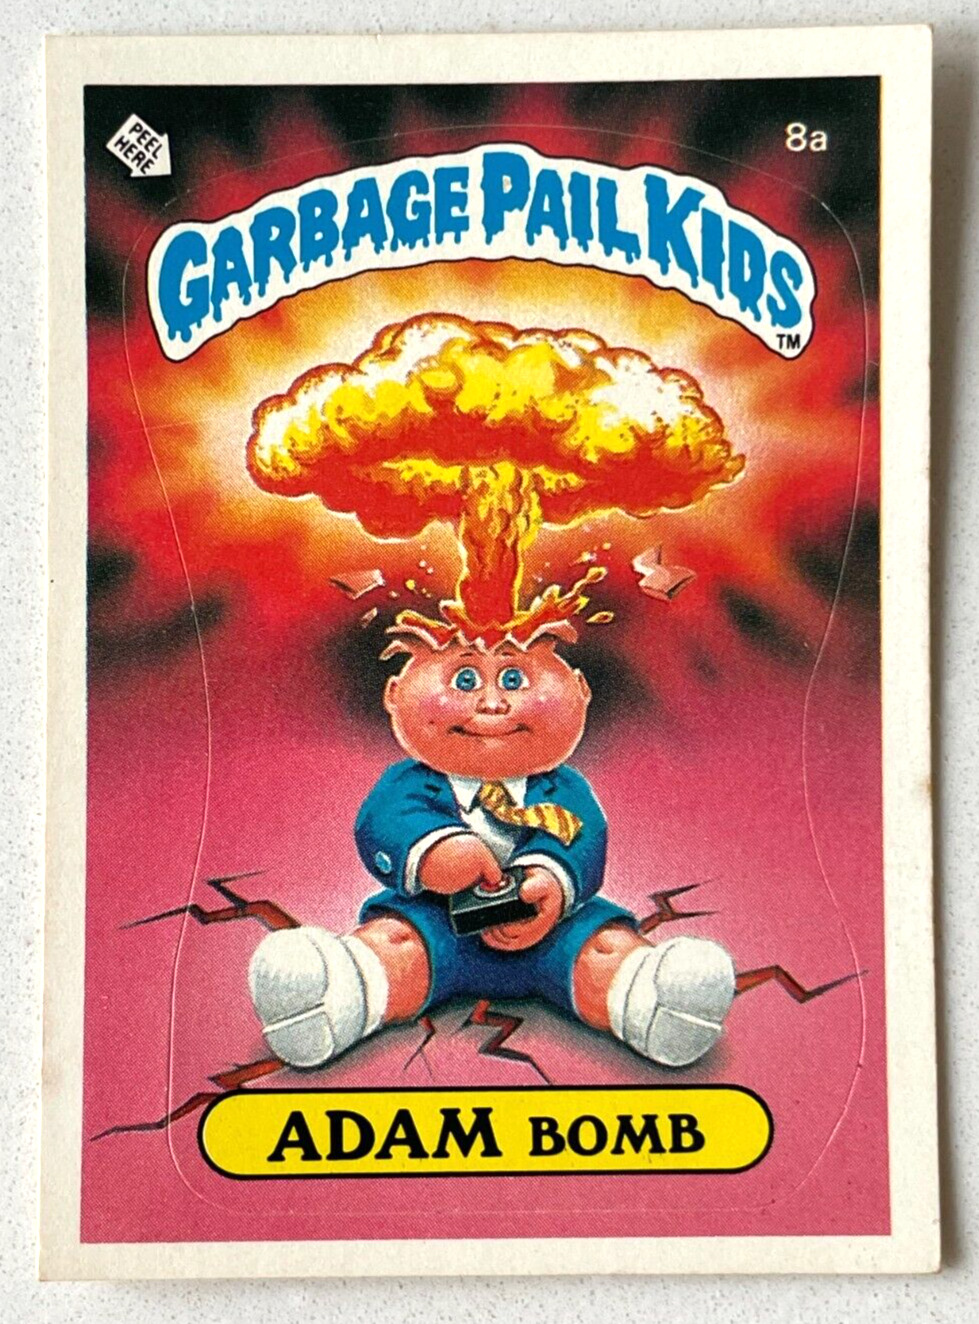 1985 Topps Garbage Pail Kids OS1 1st Series ADAM BOMB Card 8a Checklist GLOSSY